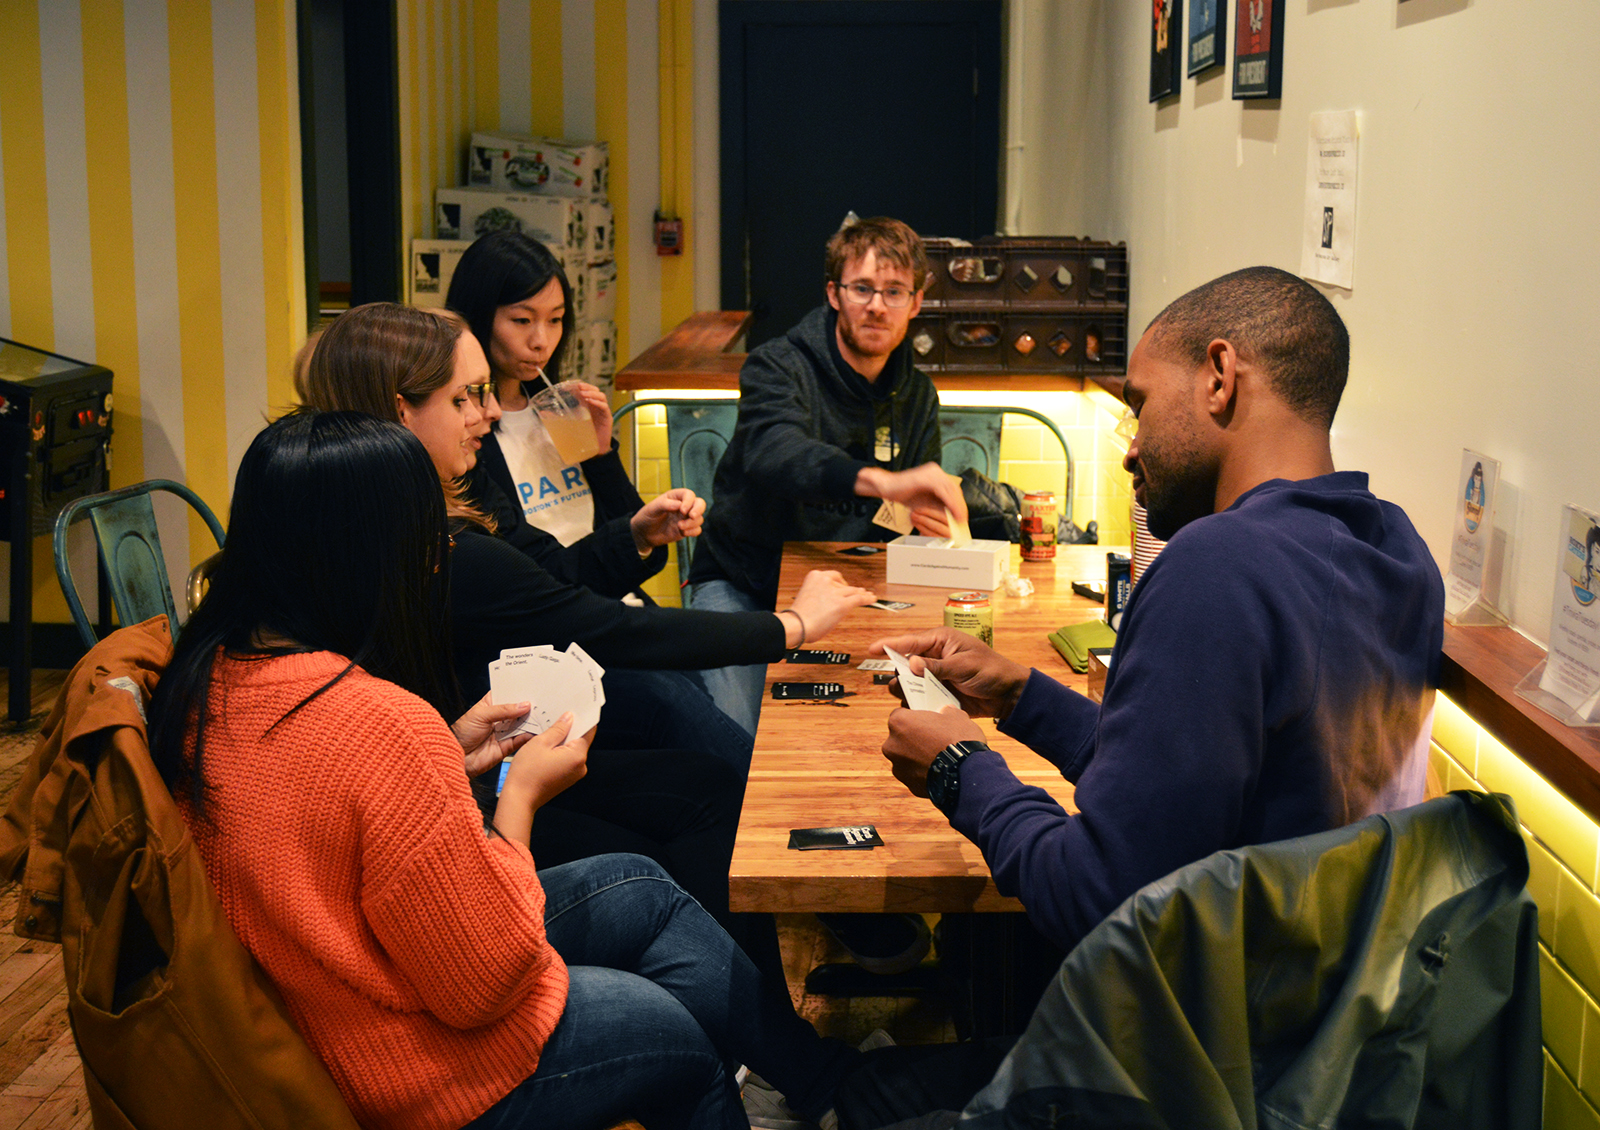 Before heading to the polls, voters play a game of Cards Against Humanity at Roxy’s Grilled Cheese in Allston. PHOTO BY ERIN BILLINGS/ DAILY FREE PRESS STAFF 